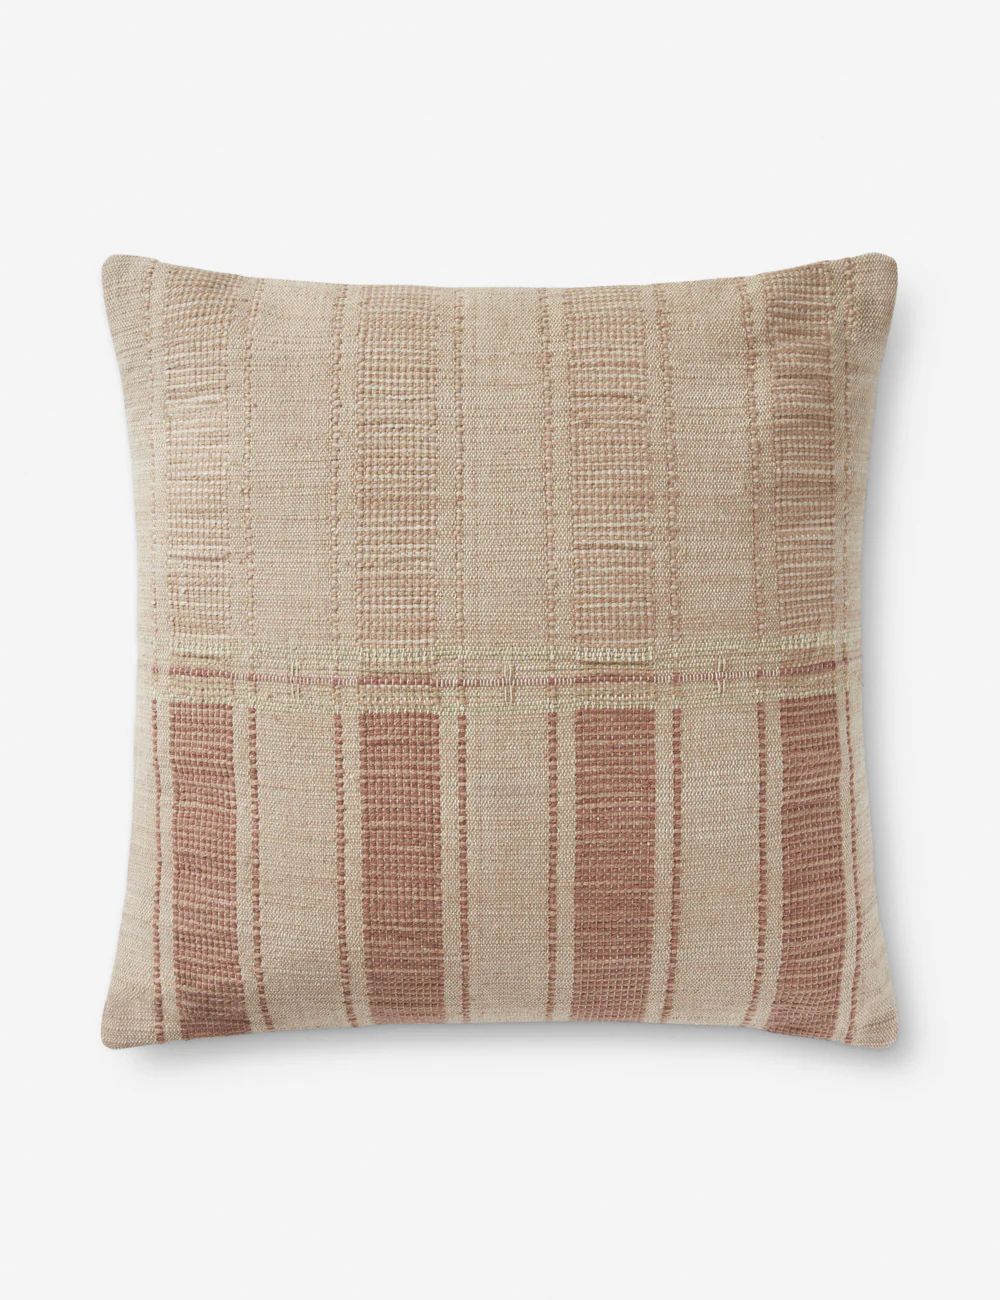 Marin Pillow by Amber Lewis x Loloi | Lulu and Georgia 